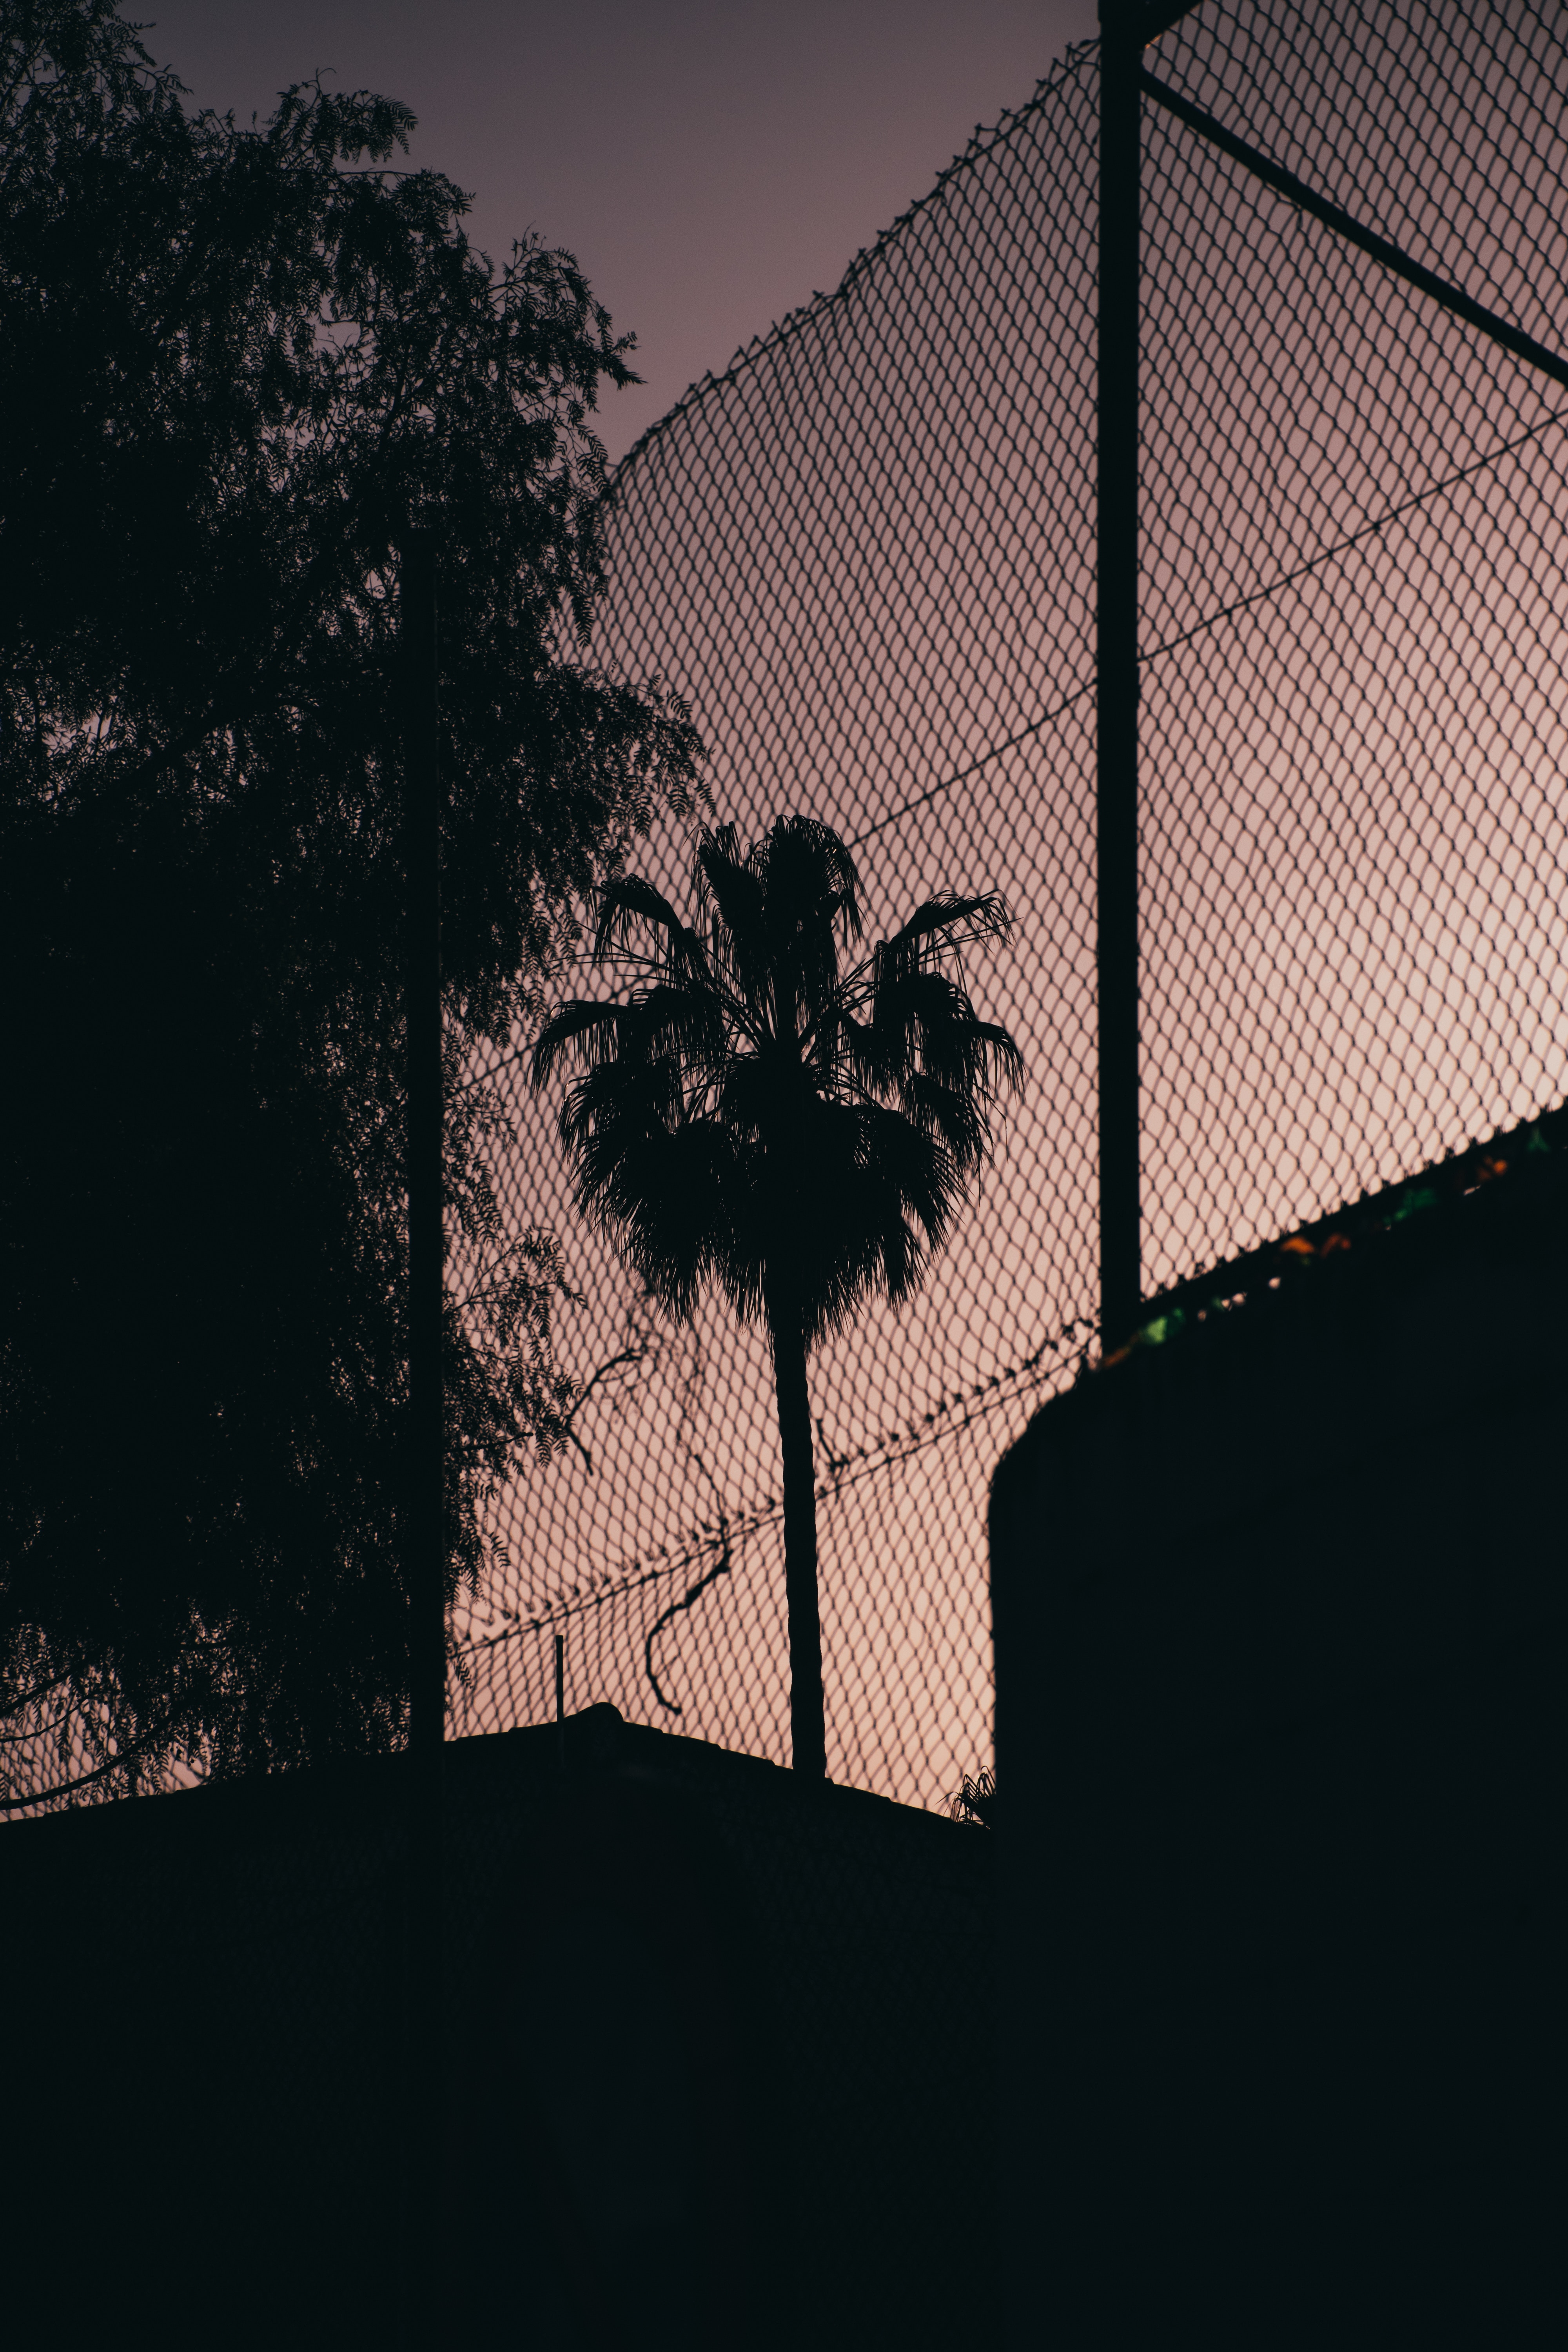 palm, dark, night, grid, fence, darkness wallpaper for mobile